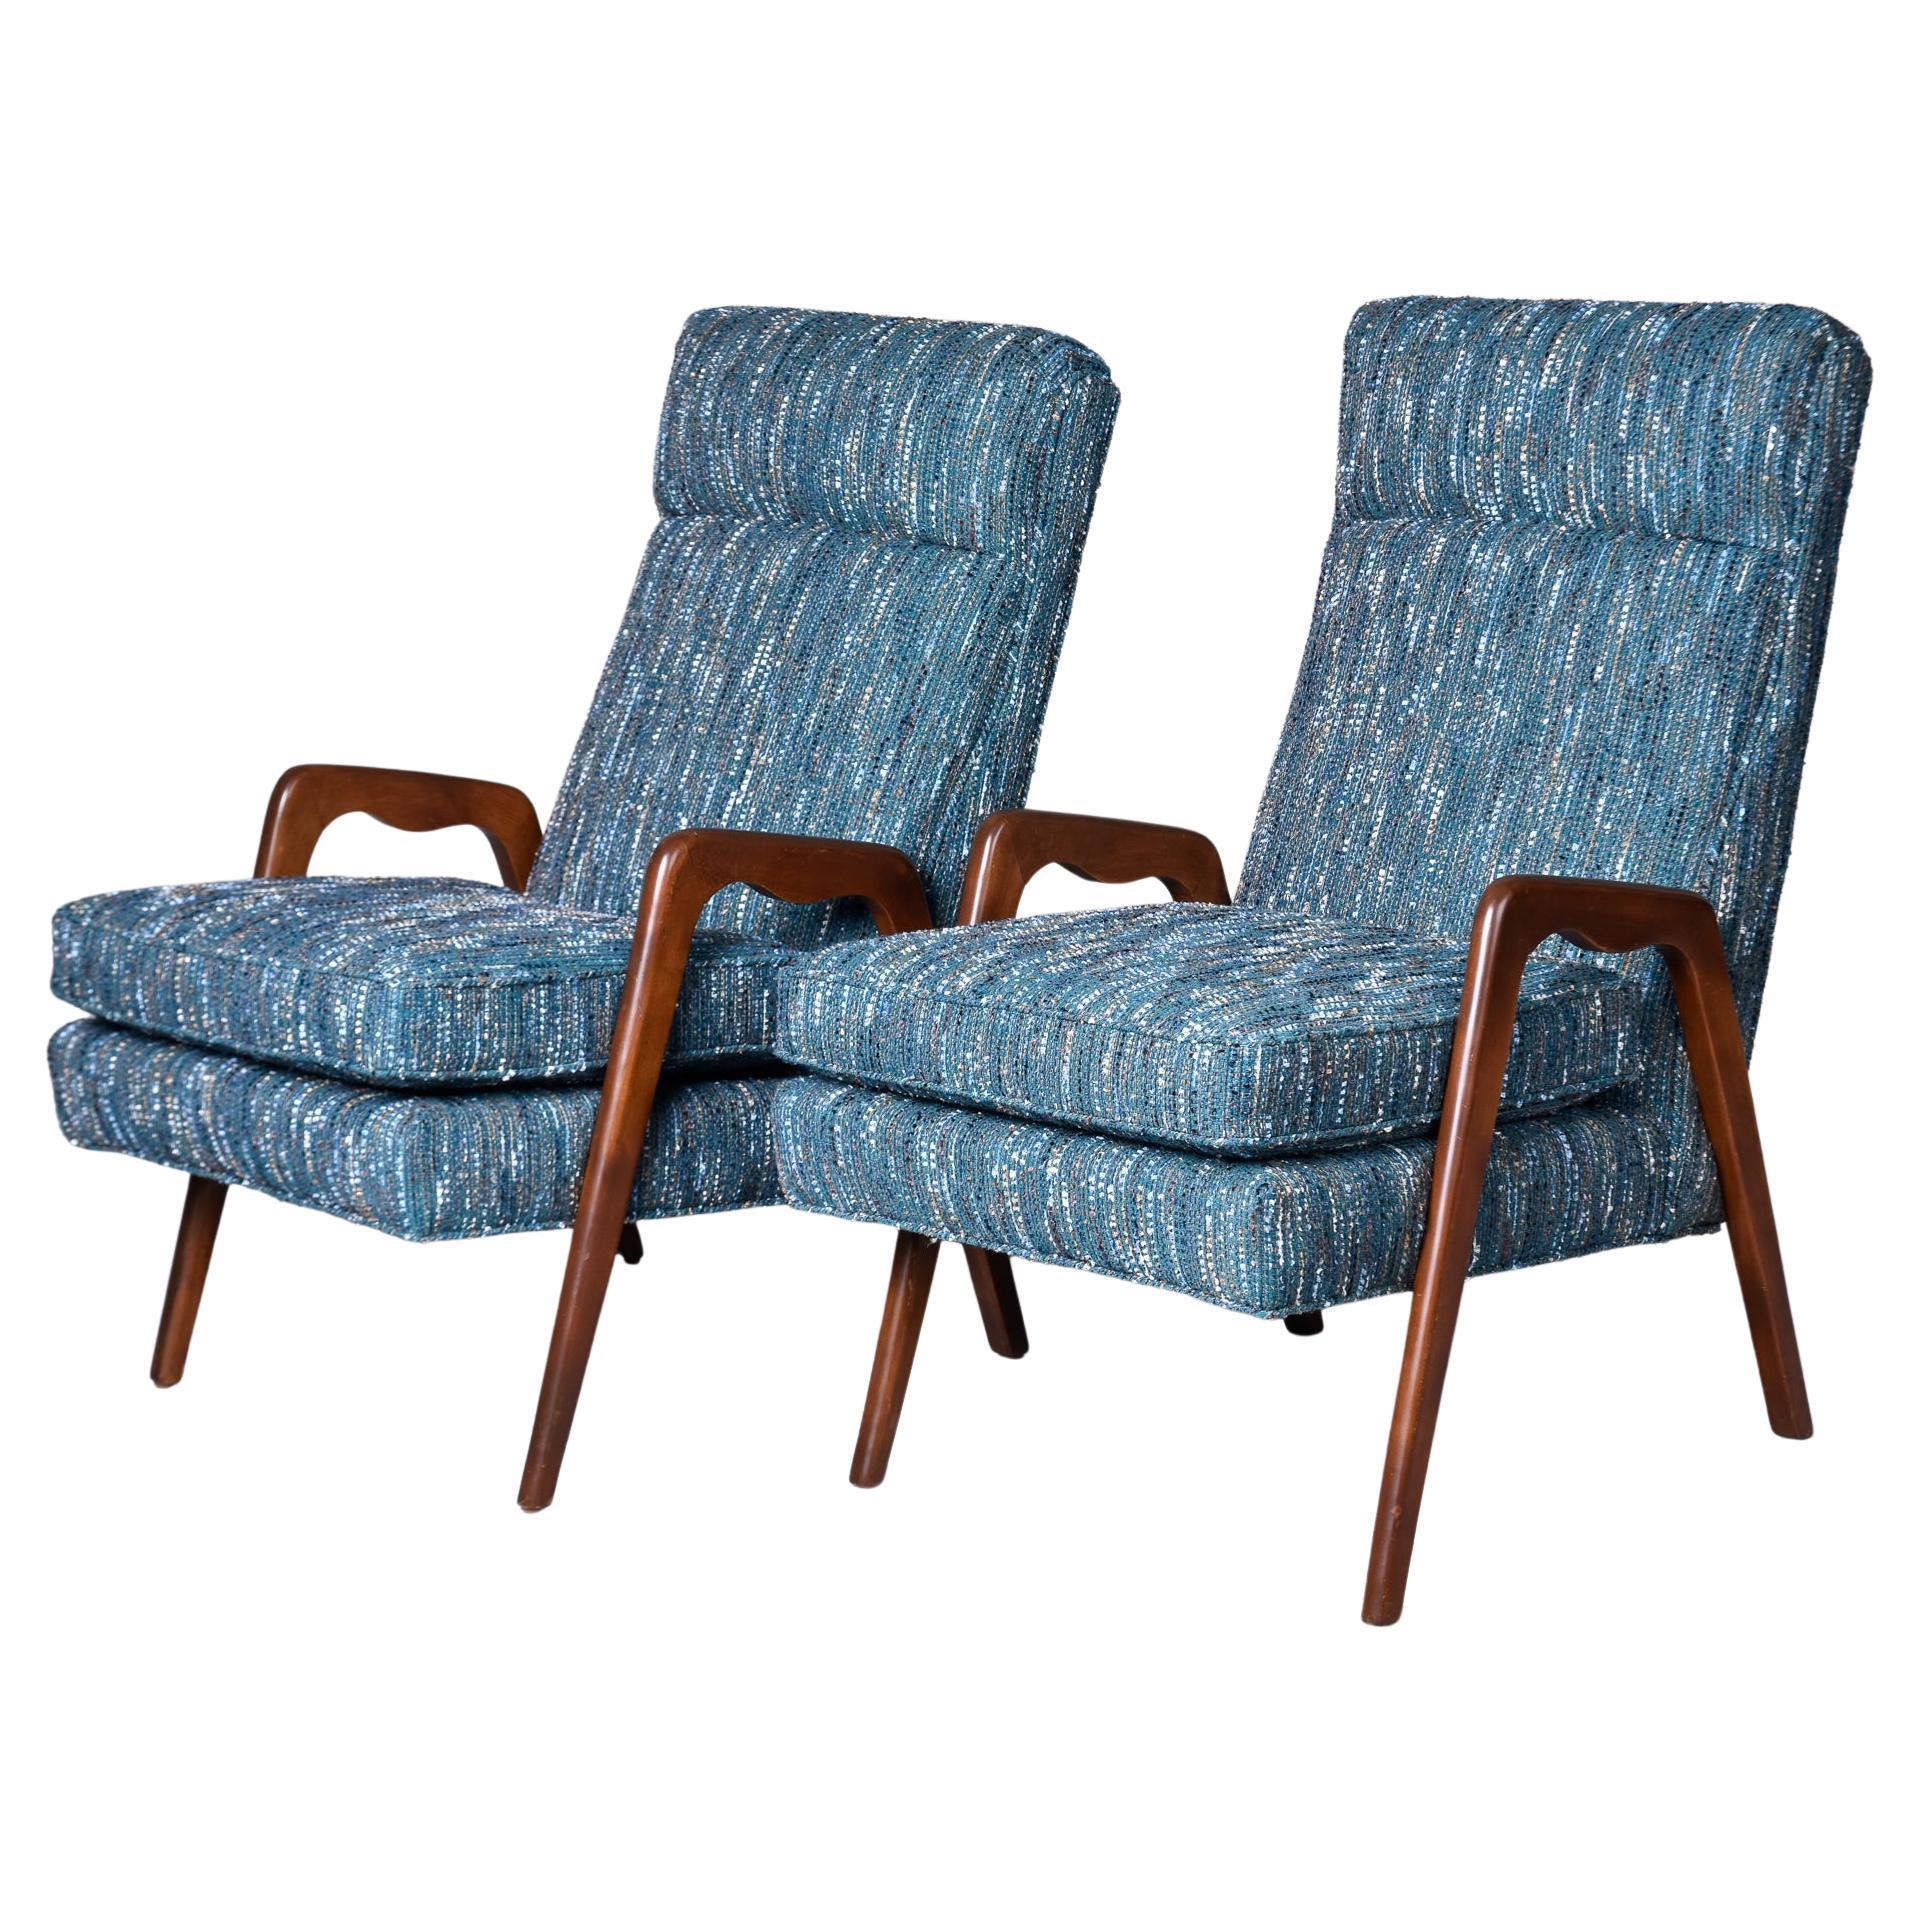 Pair of Mid-Century Italian Chairs with New Teal Tweed Upholstery For Sale